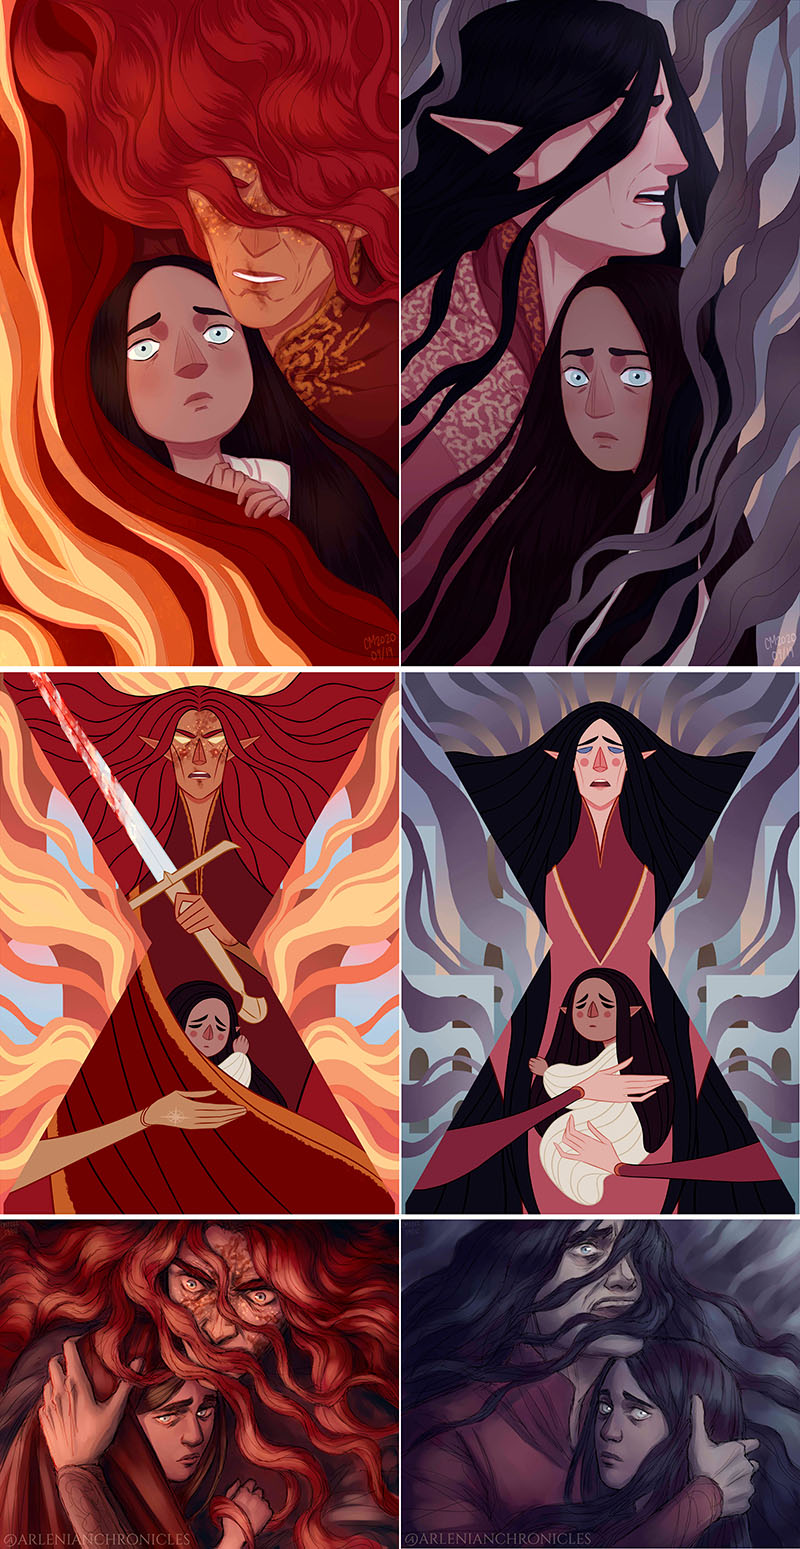 "Fire and Smoke" Top:2020, Middle: 2021, Bottom: 2022 by Cassandra/ArlenianChronicles